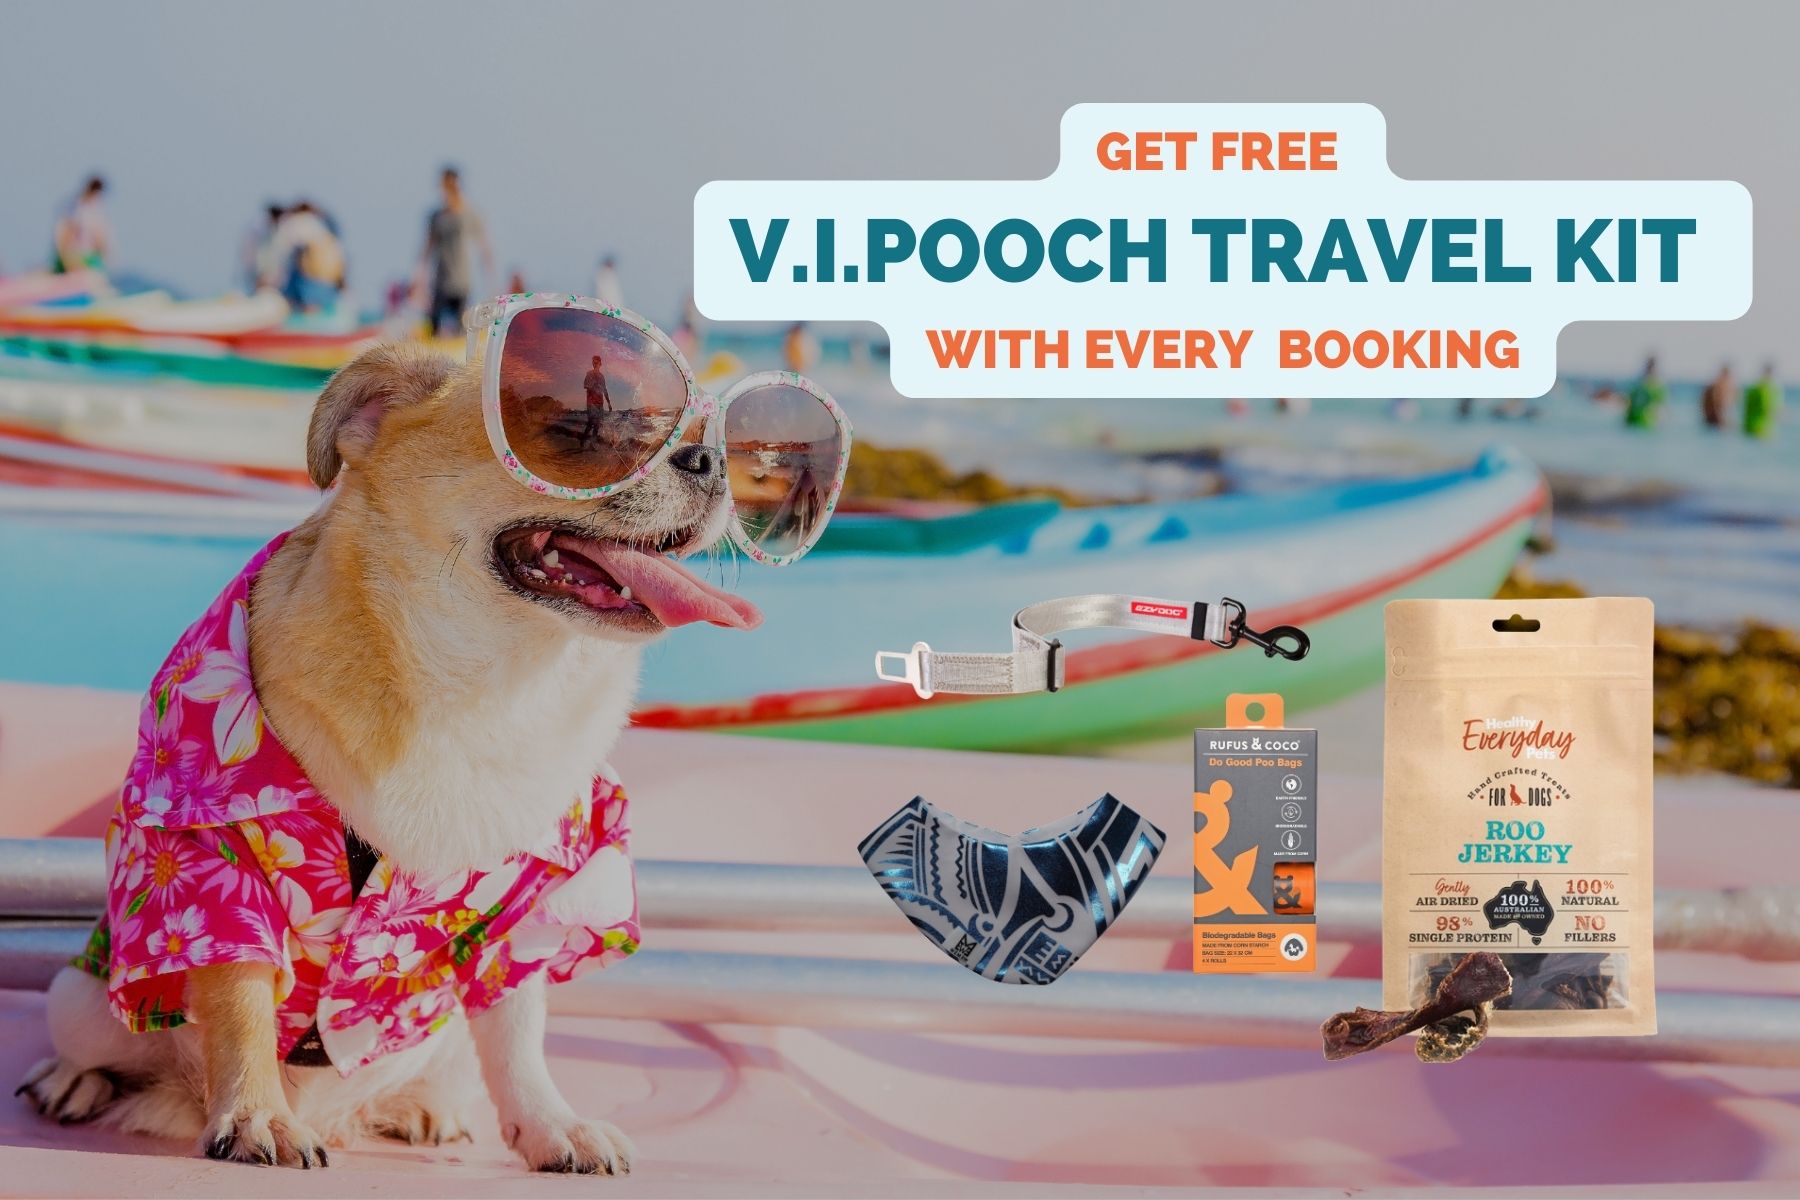 V.I.POOCH TRAVEL KIT MEW MEW - Accommodation Page with Products